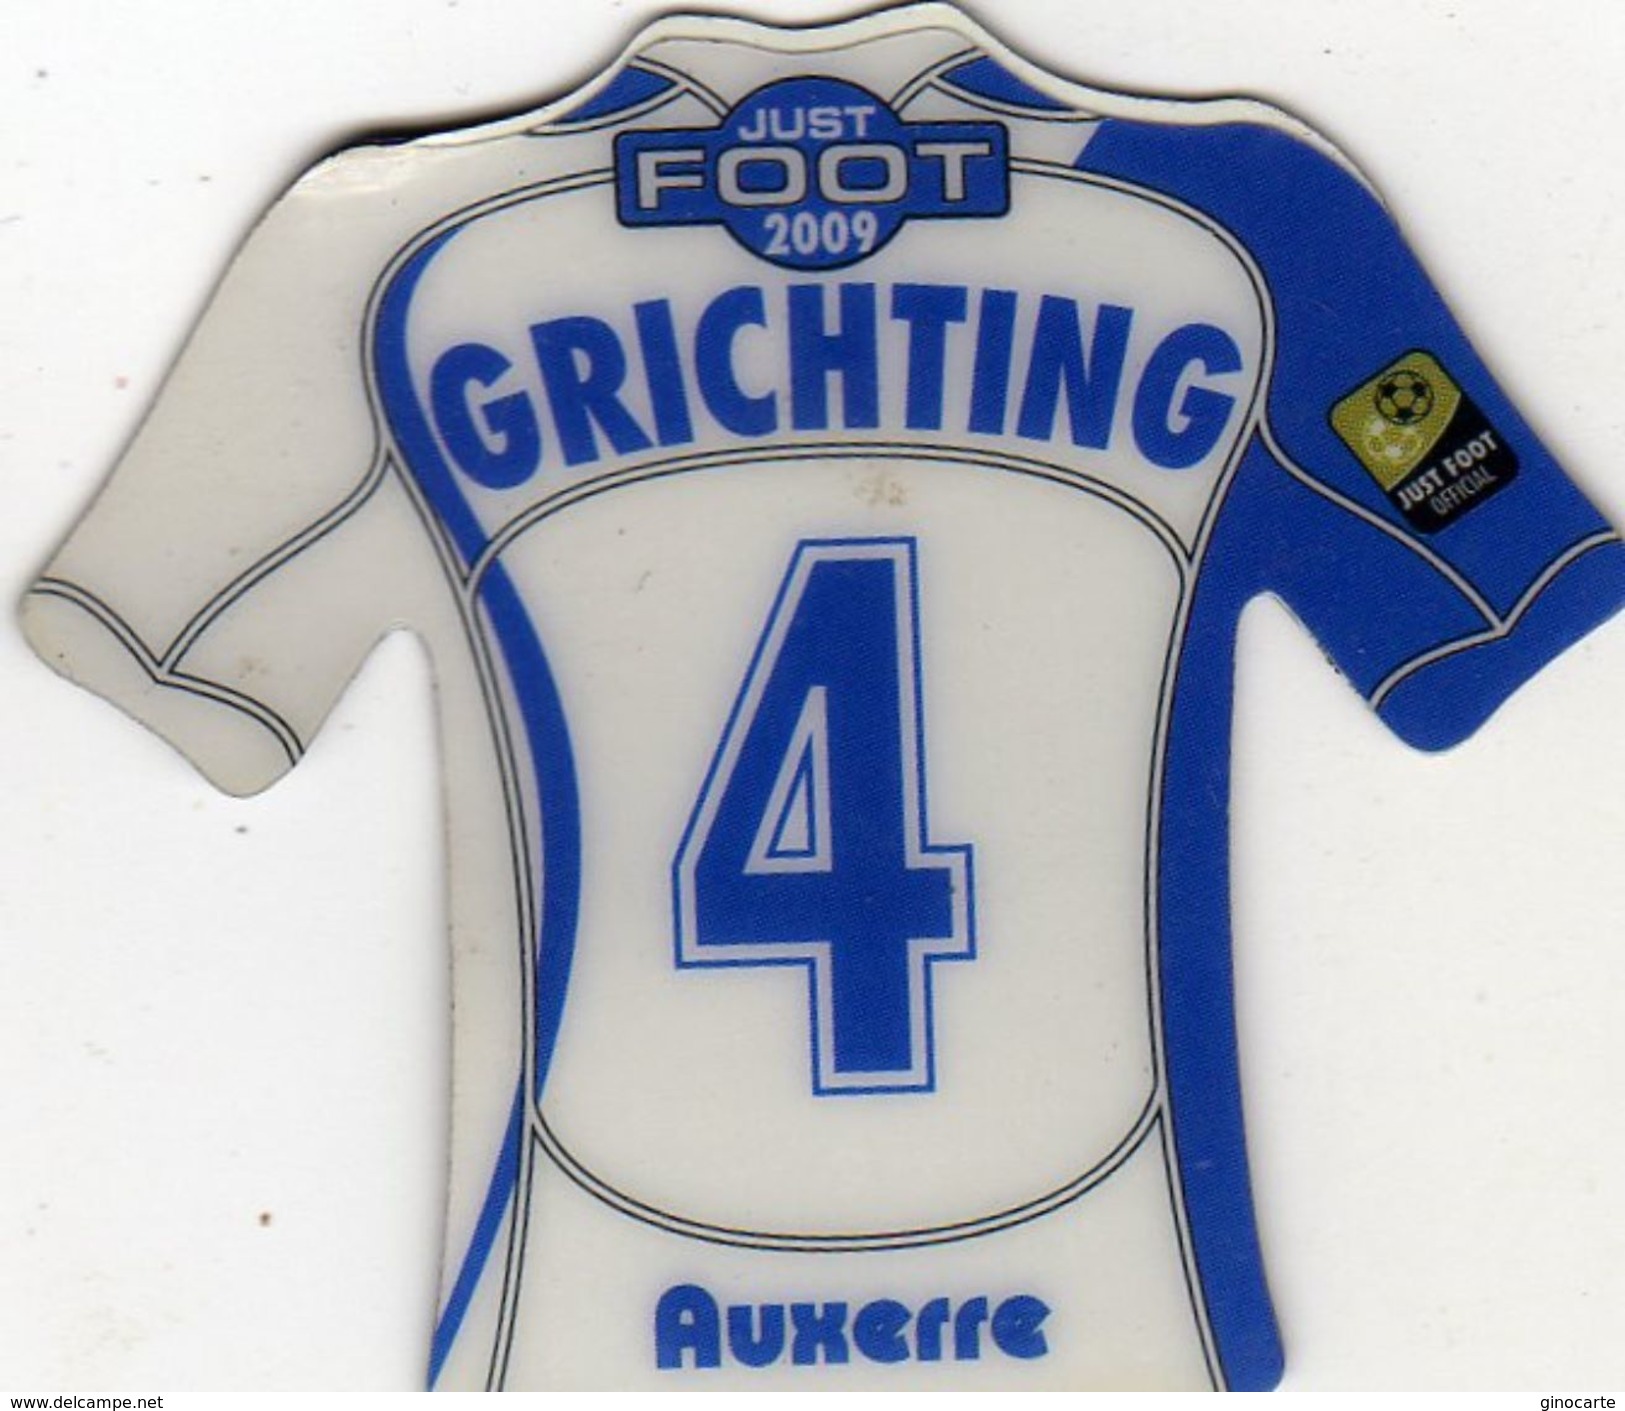 Magnet Magnets Maillot De Football Pitch Auxerre Grichting 2009 - Sport